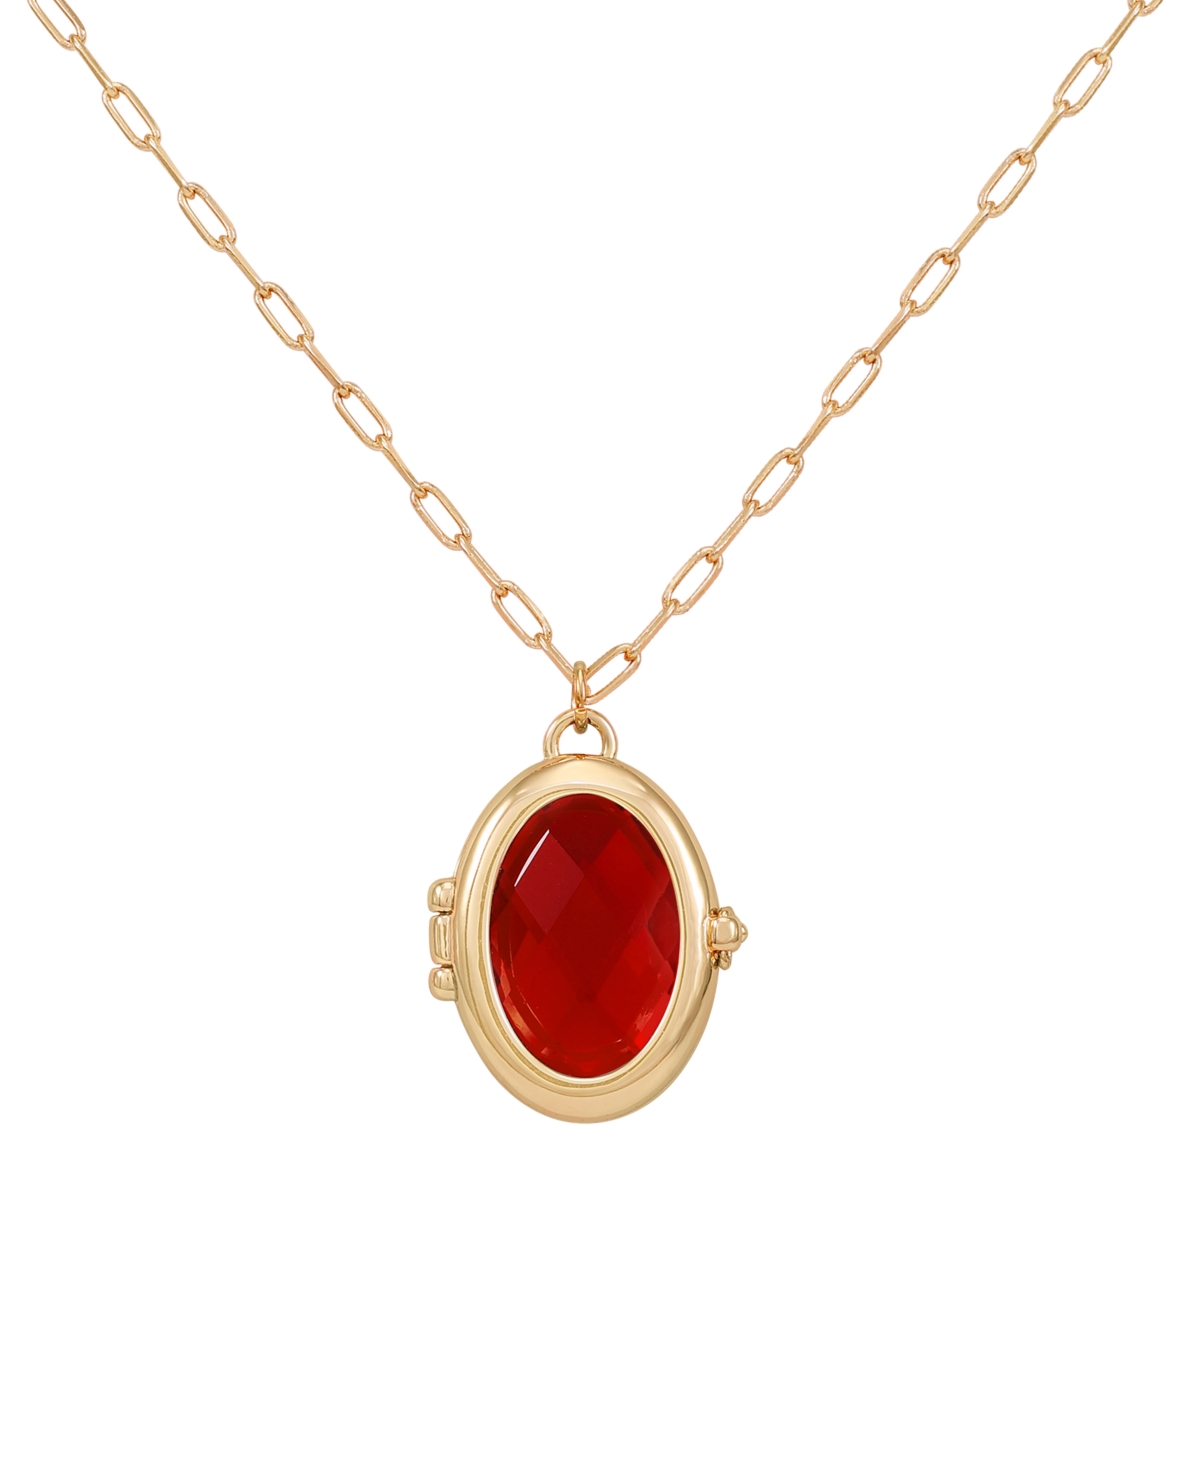 Guess Gold-tone Removable Stone Oval Locket Pendant Necklace, 18" + 3" Extender In Garnet